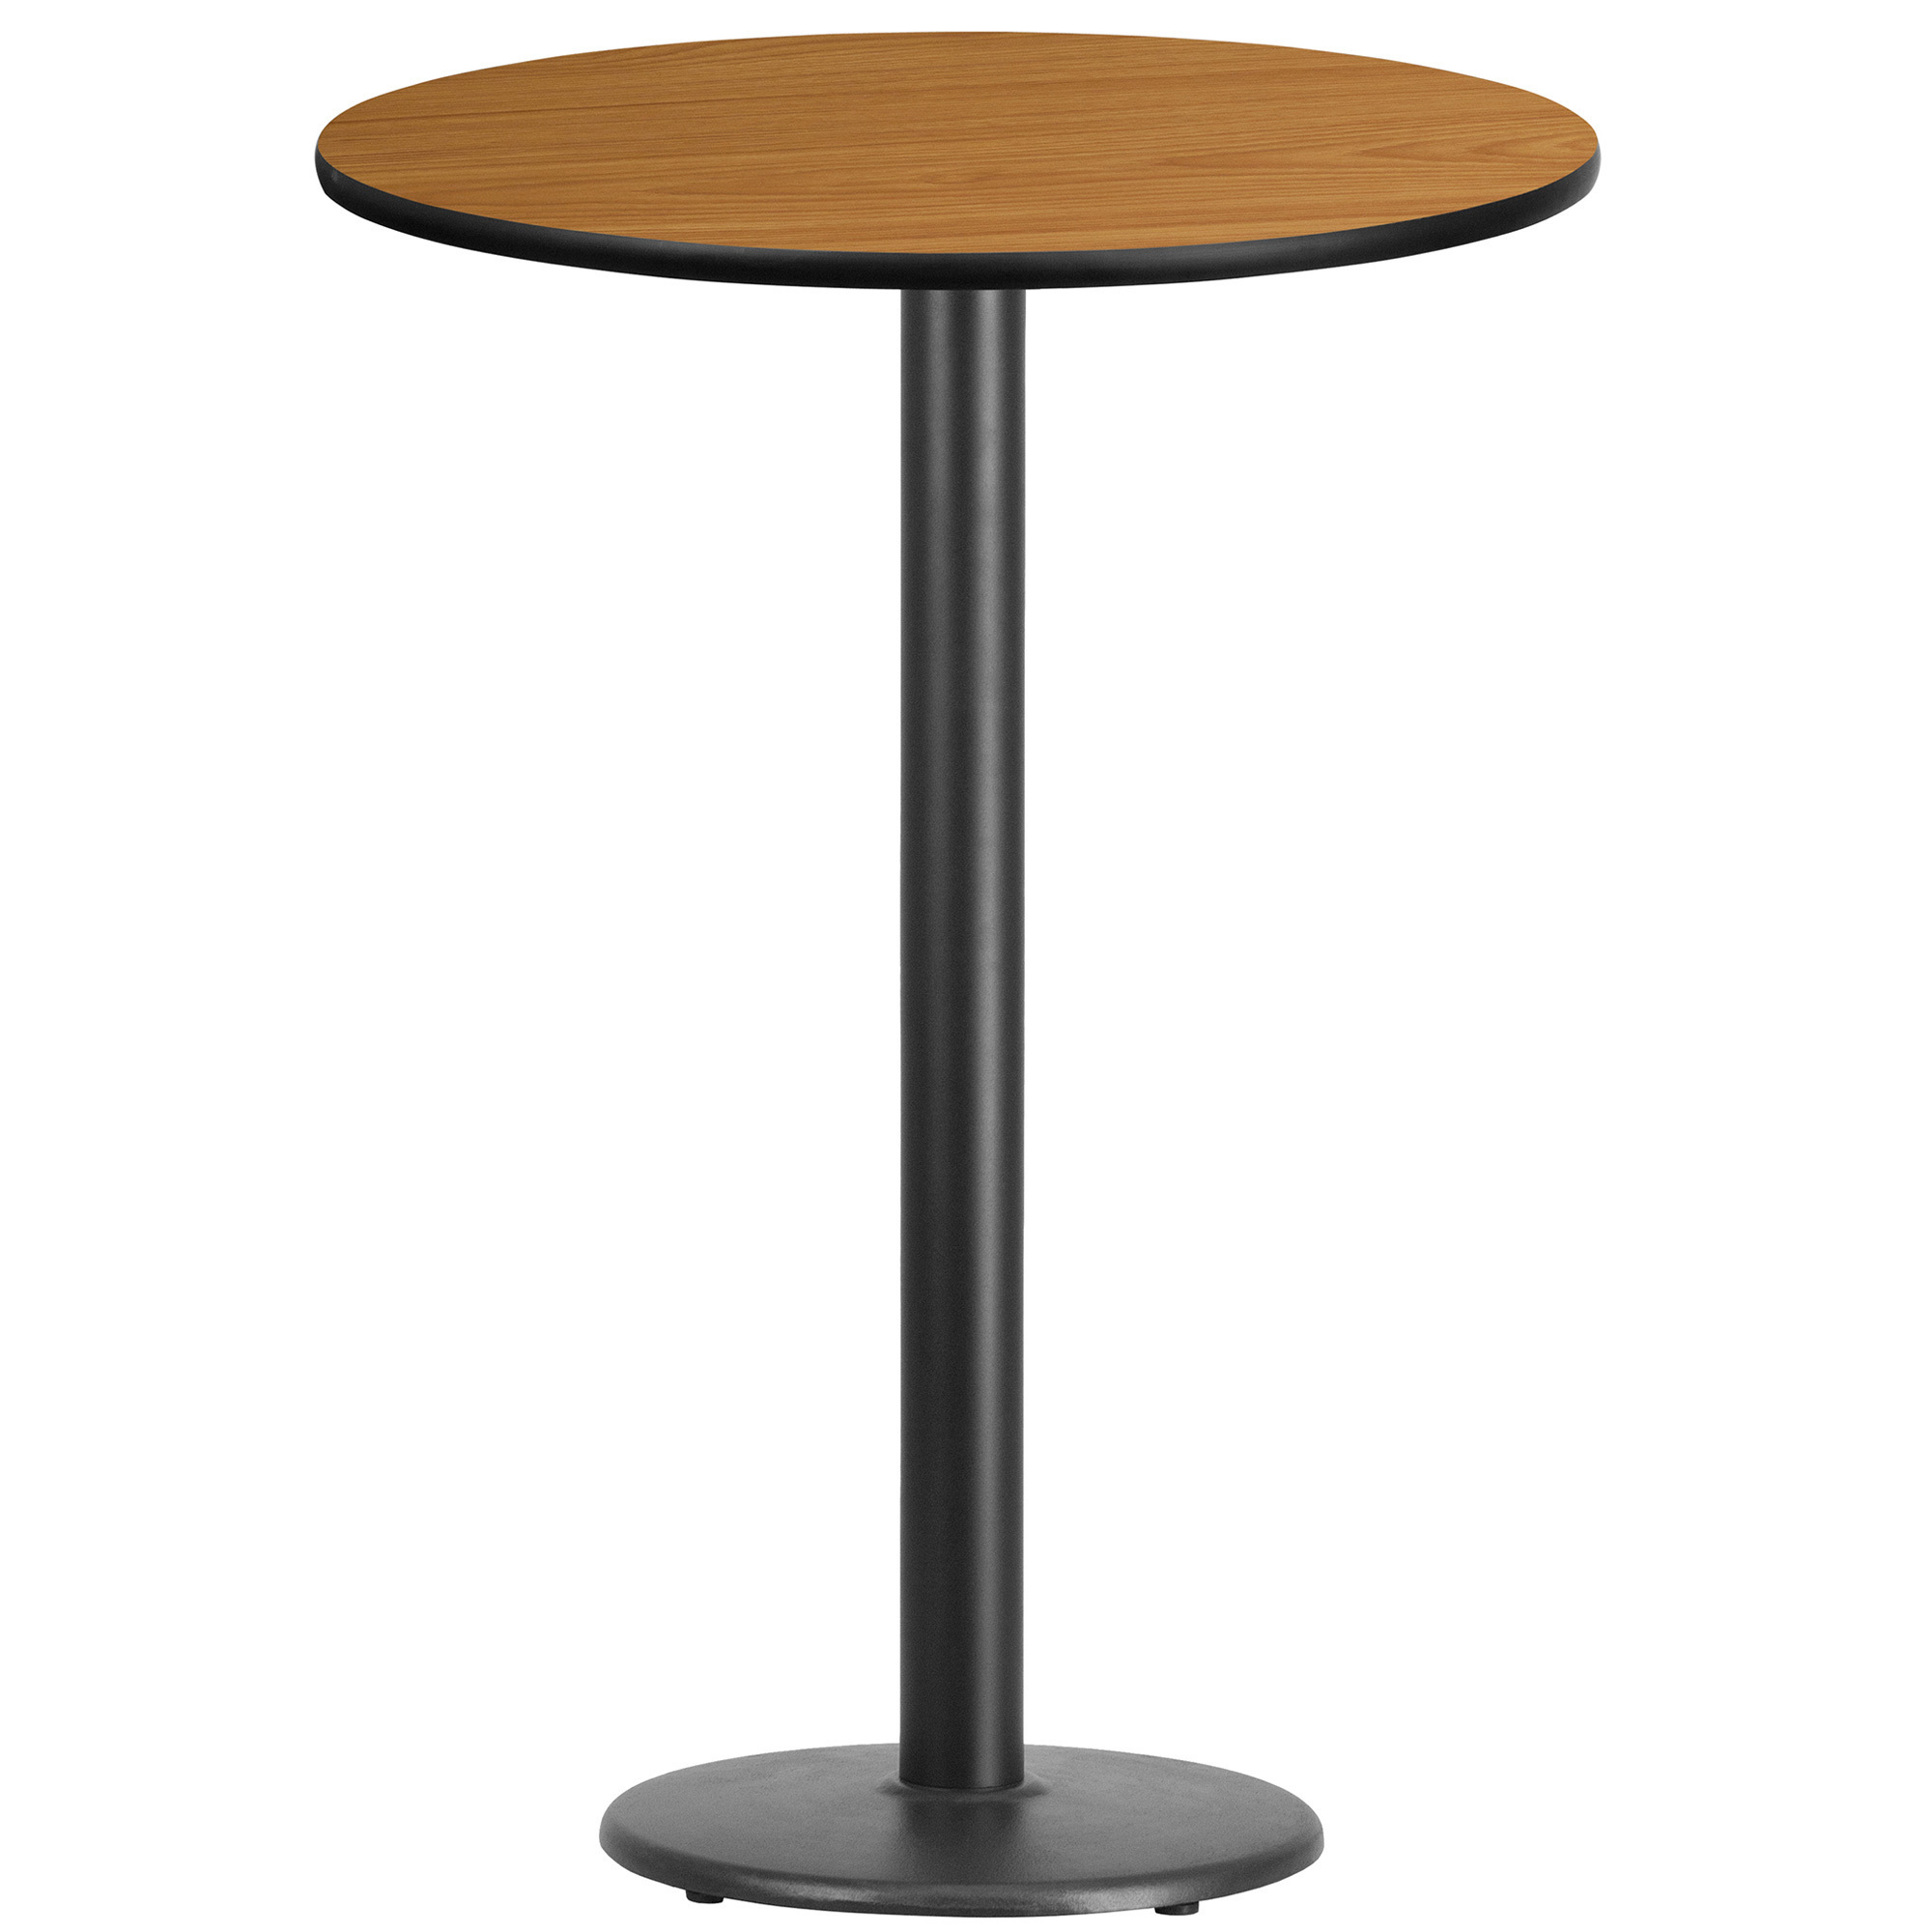 Flash Furniture 30Inch Round Bar Table with Round Base â Reversible Natural/Walnut Top, Model XURD30NTTR18B